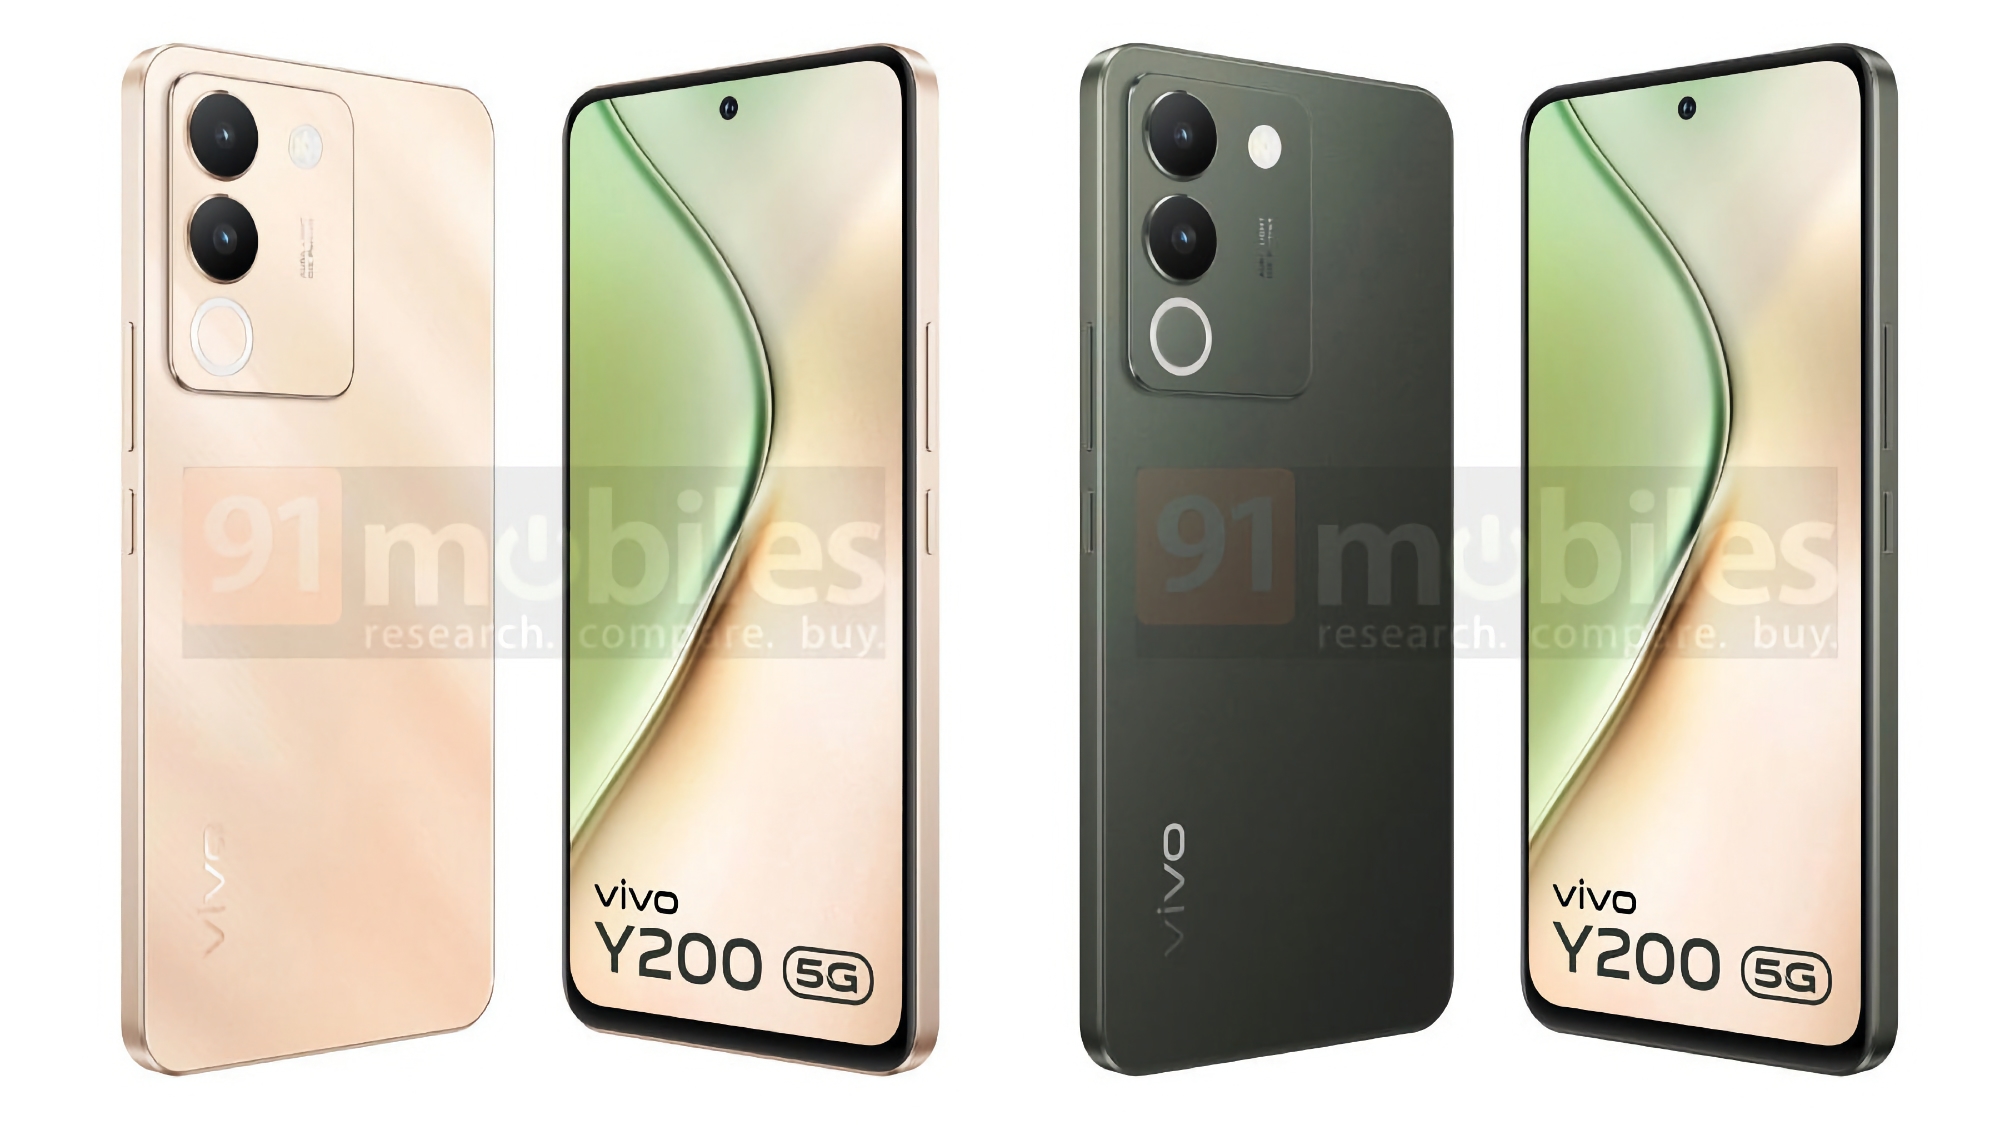 This is what the vivo Y200 5G will look like: the company's new smartphone with a 120Hz AMOLED display and a Snapdragon 4 Gen 1 chip